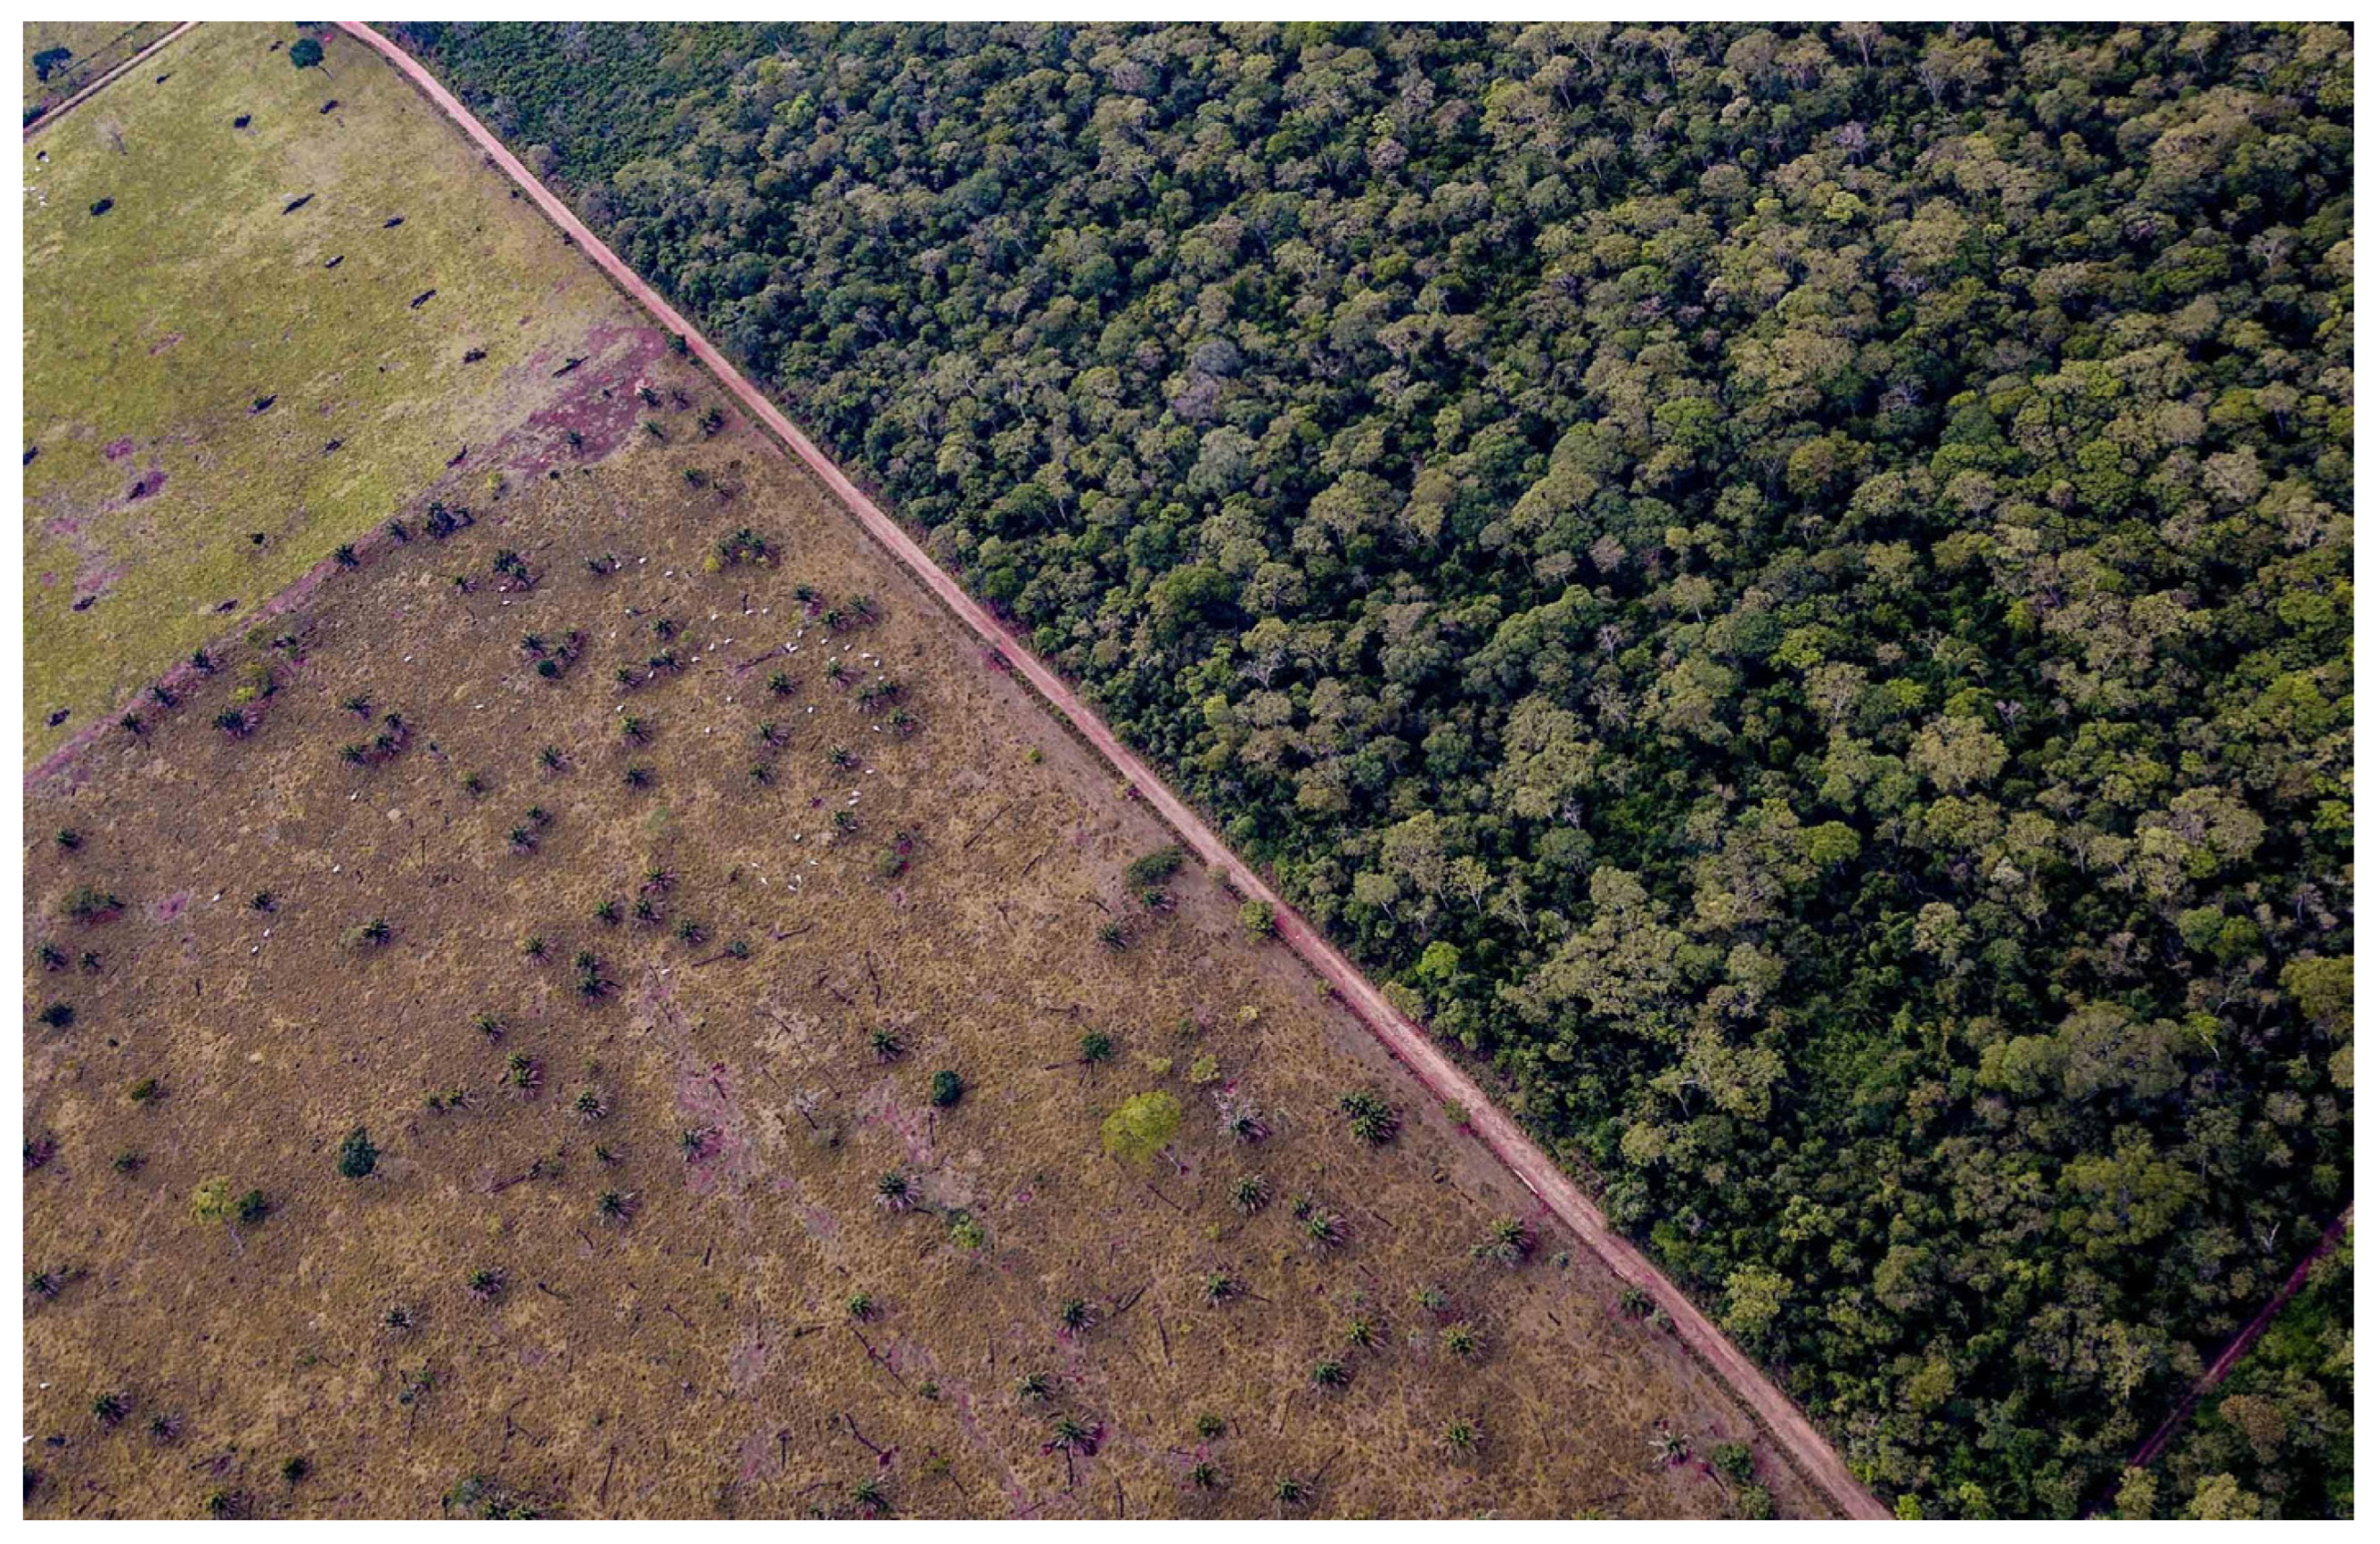 Deforestation in Brazil could significantly increase local surface  temperatures